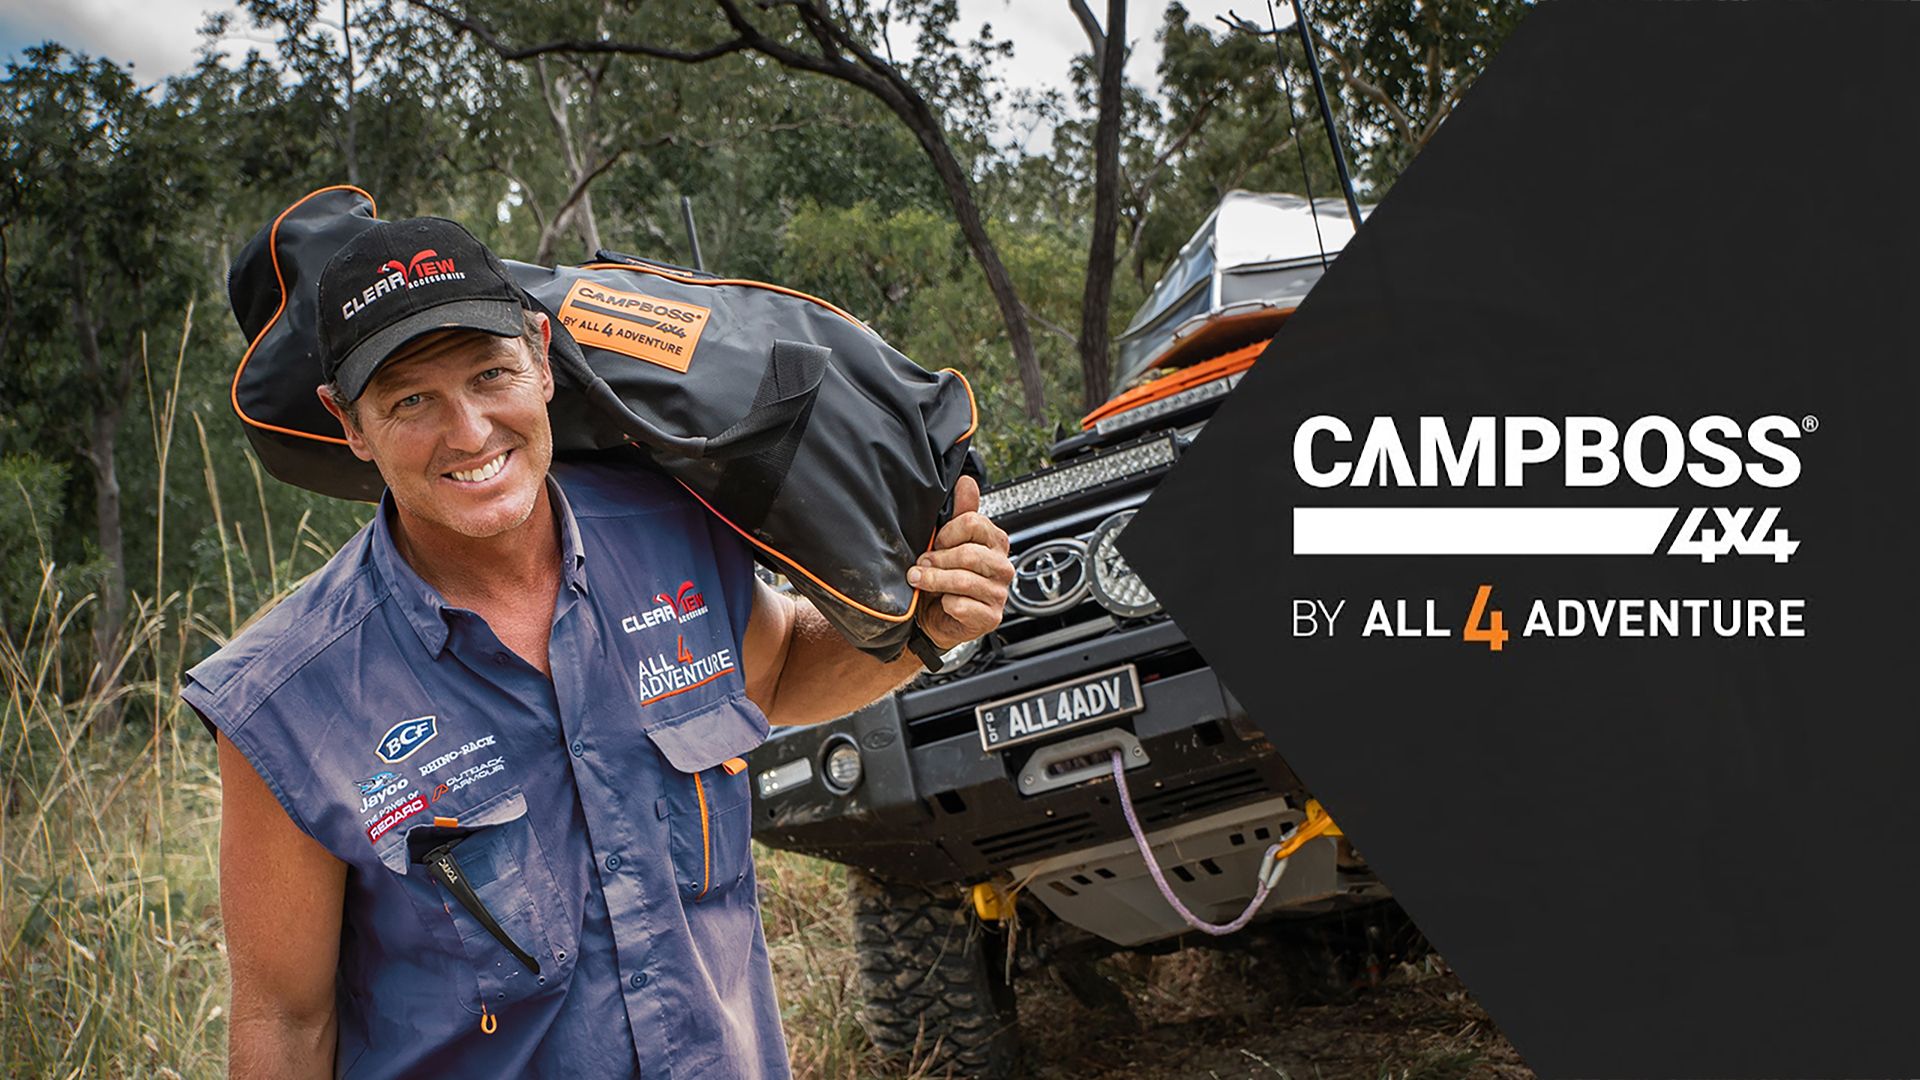 Introducing CampBoss 4x4 by All 4 Adventure